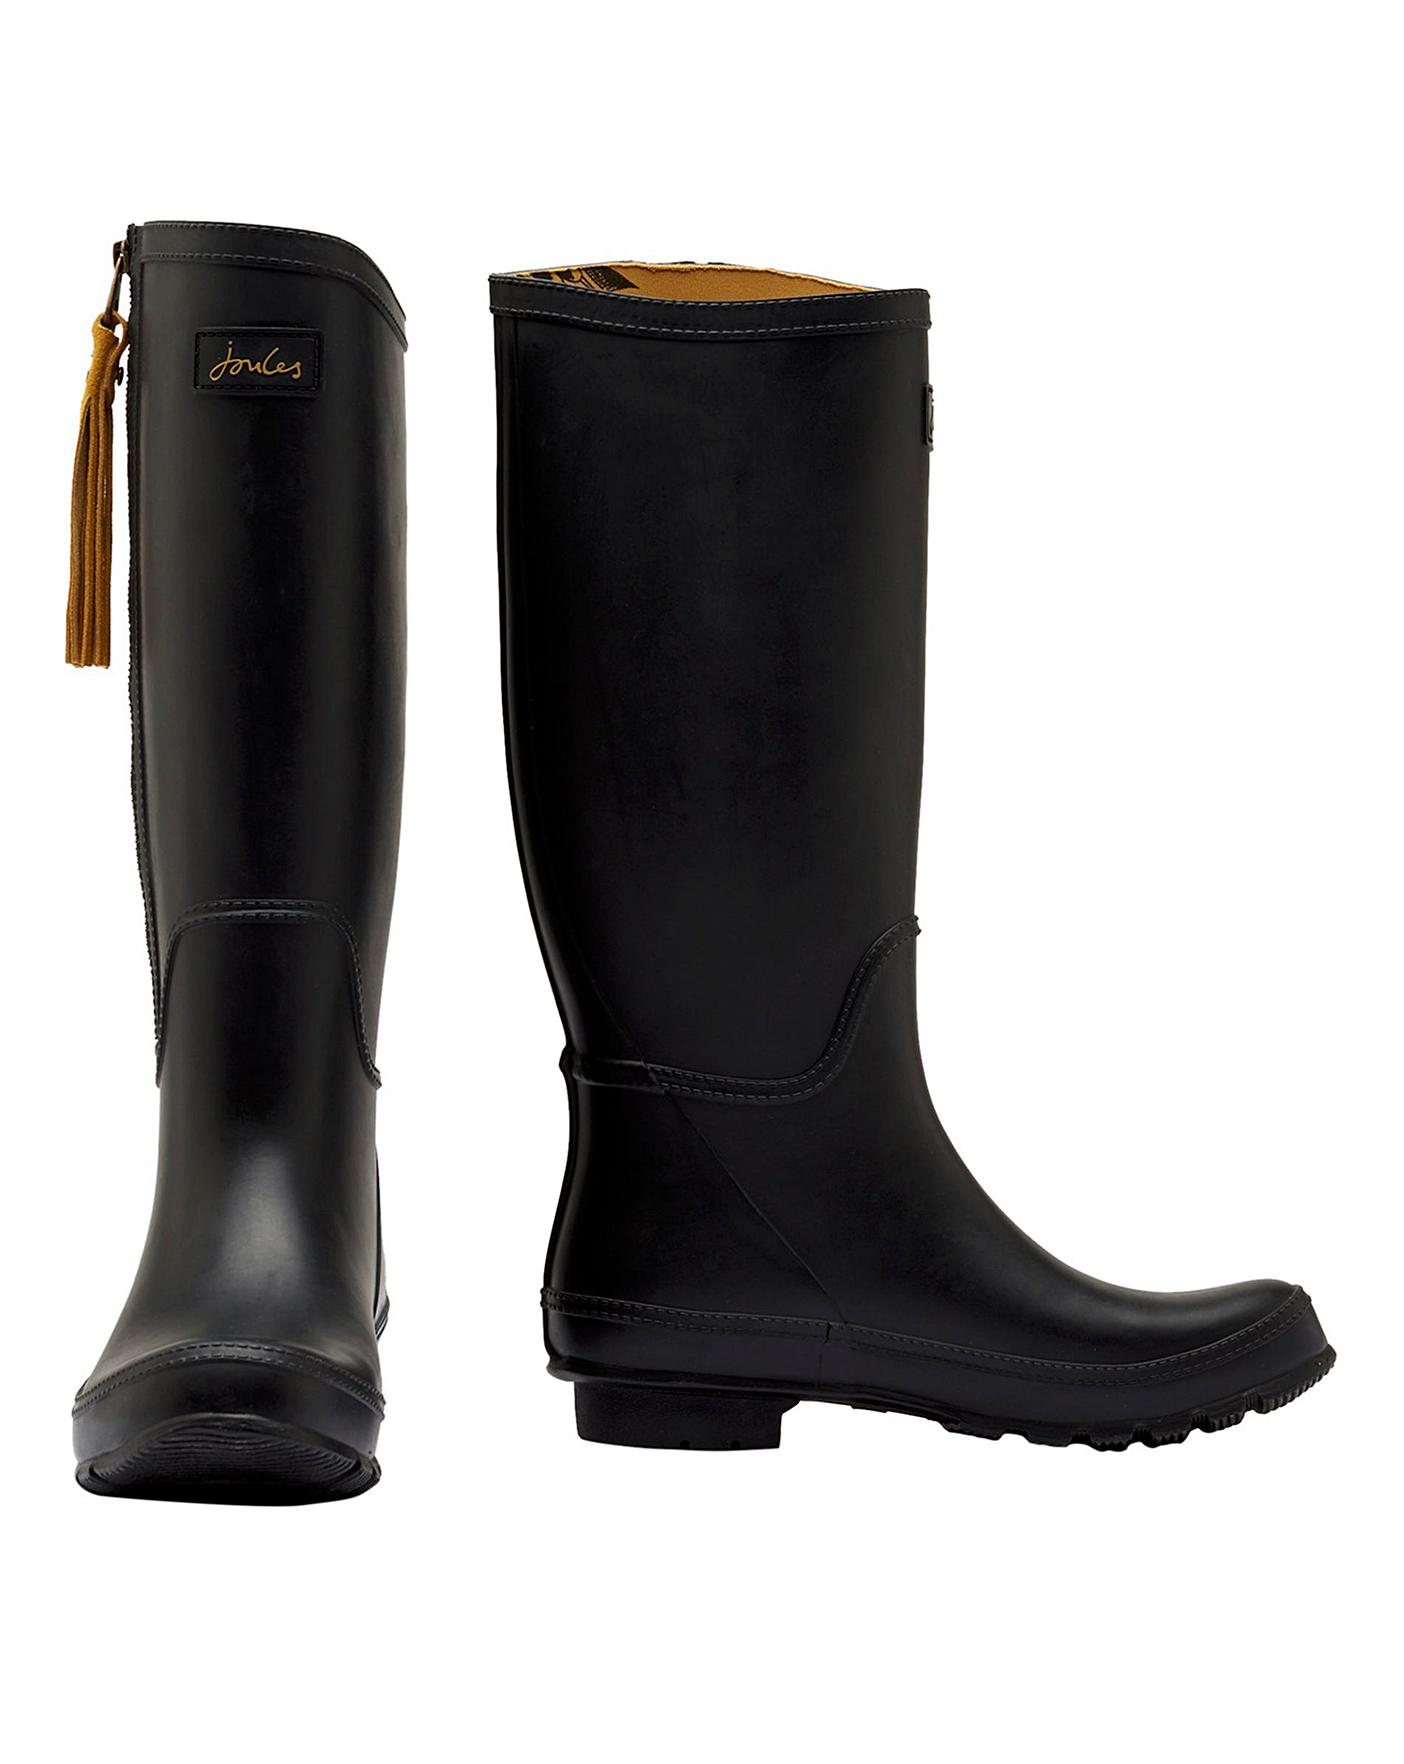 Joules Collette Equestrian Wellies D Fit | Crazy Clearance